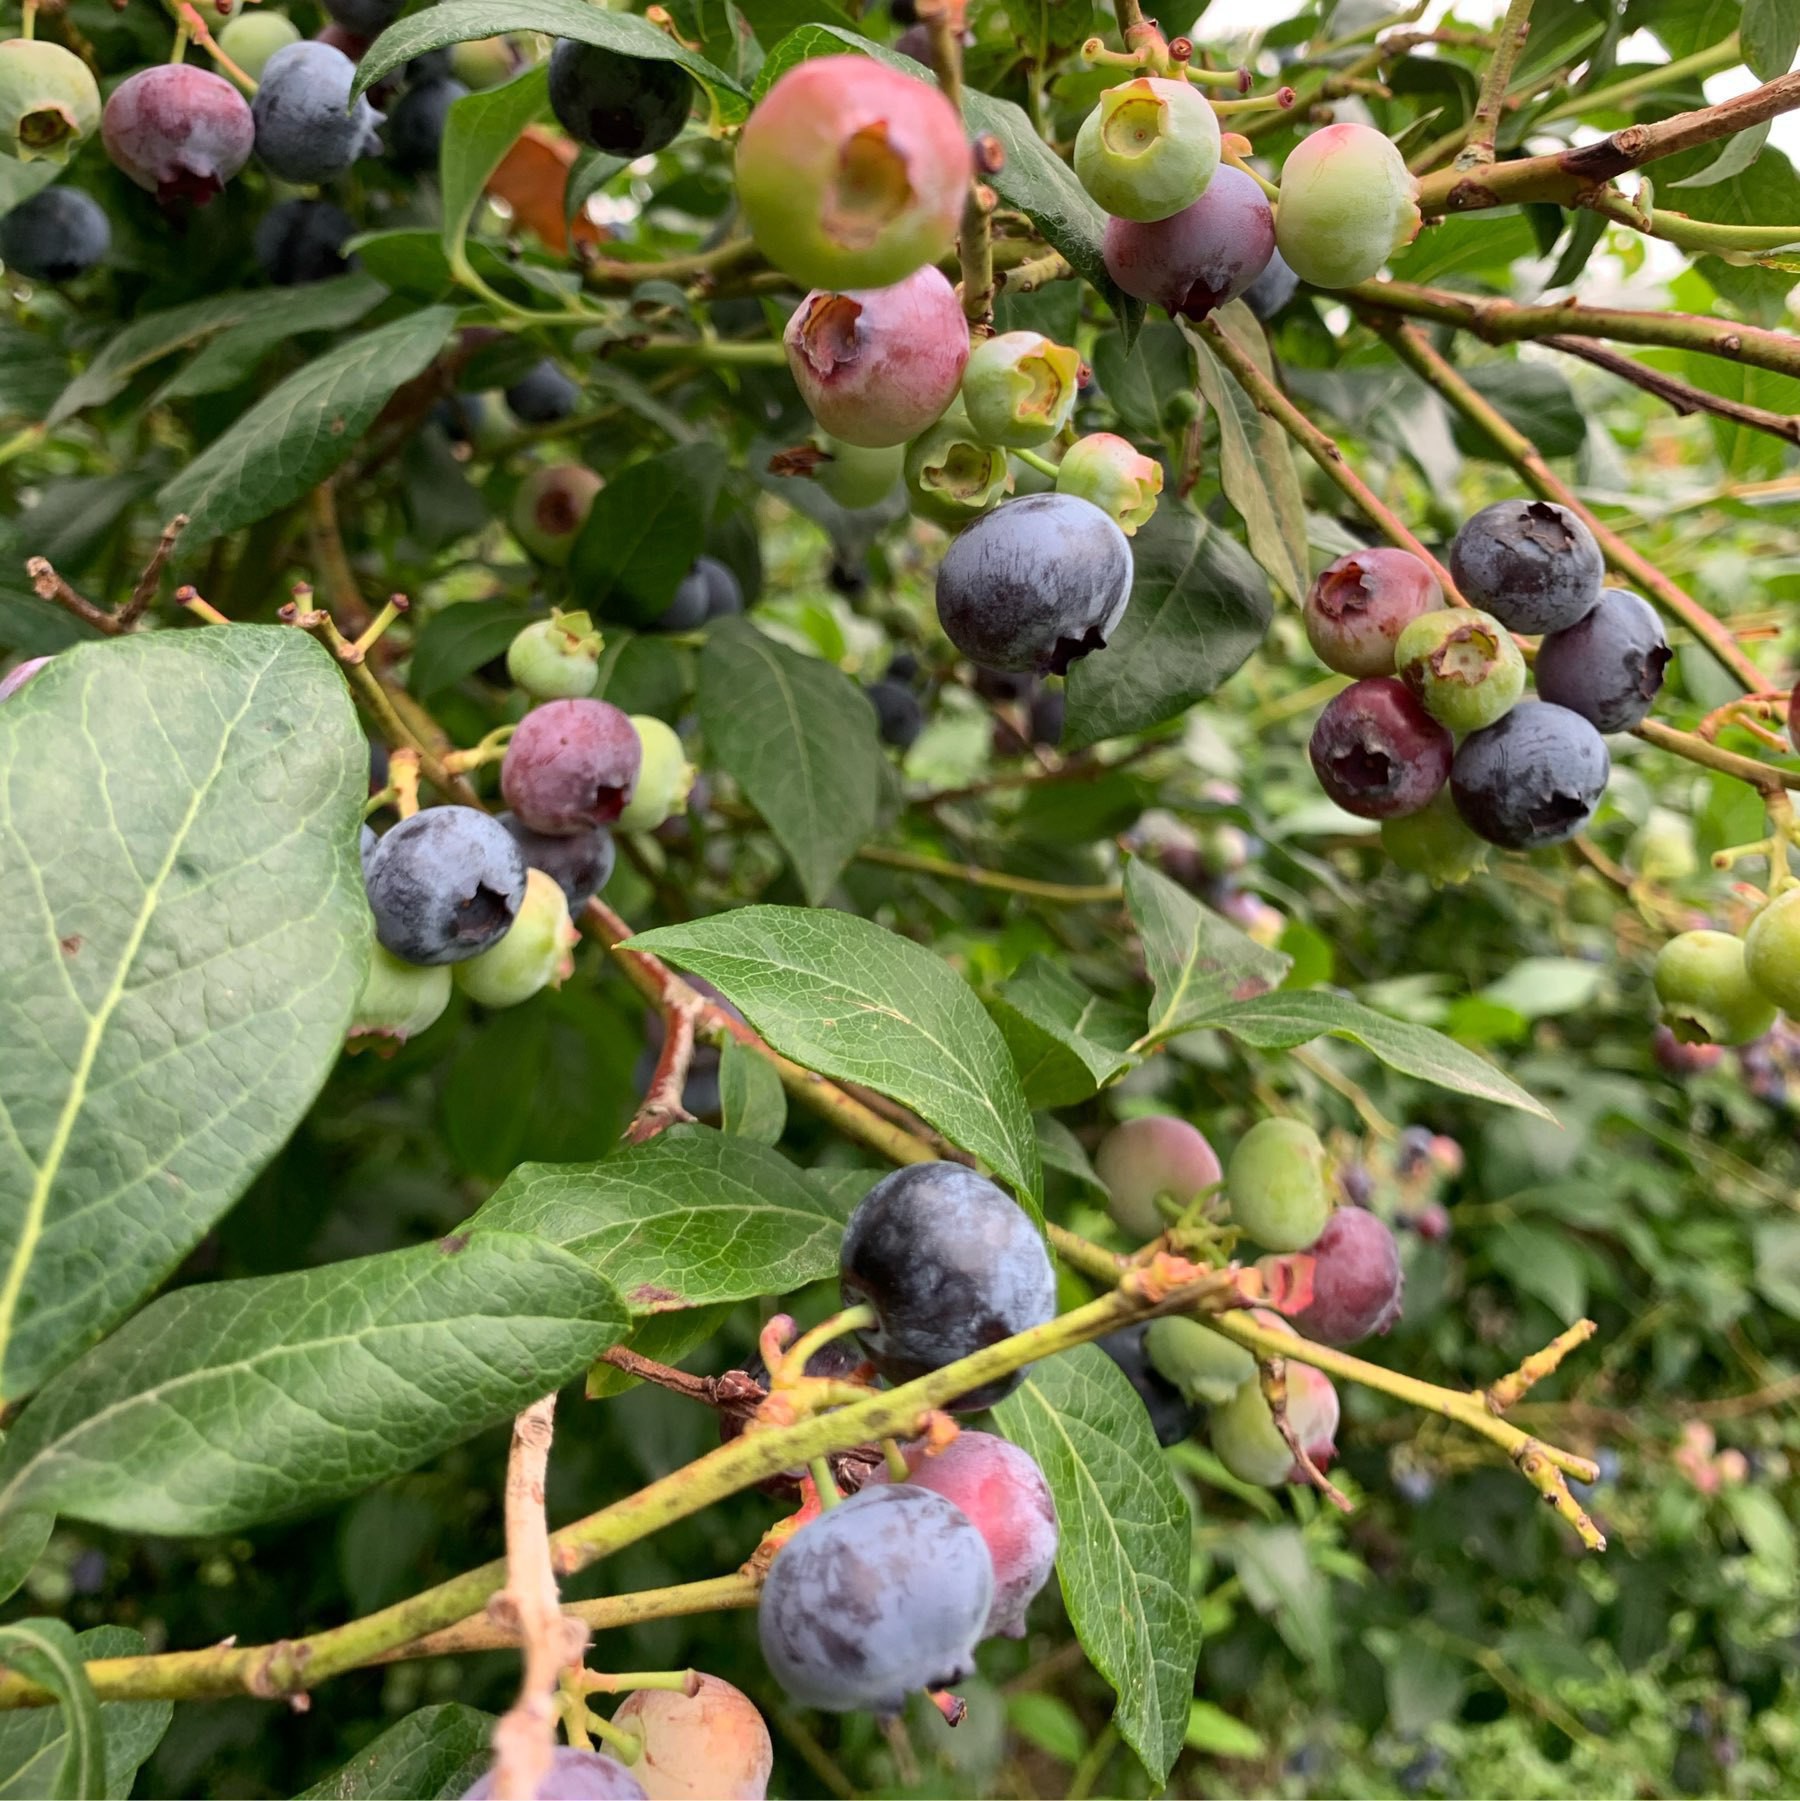 Blueberries on a blueberry tree.